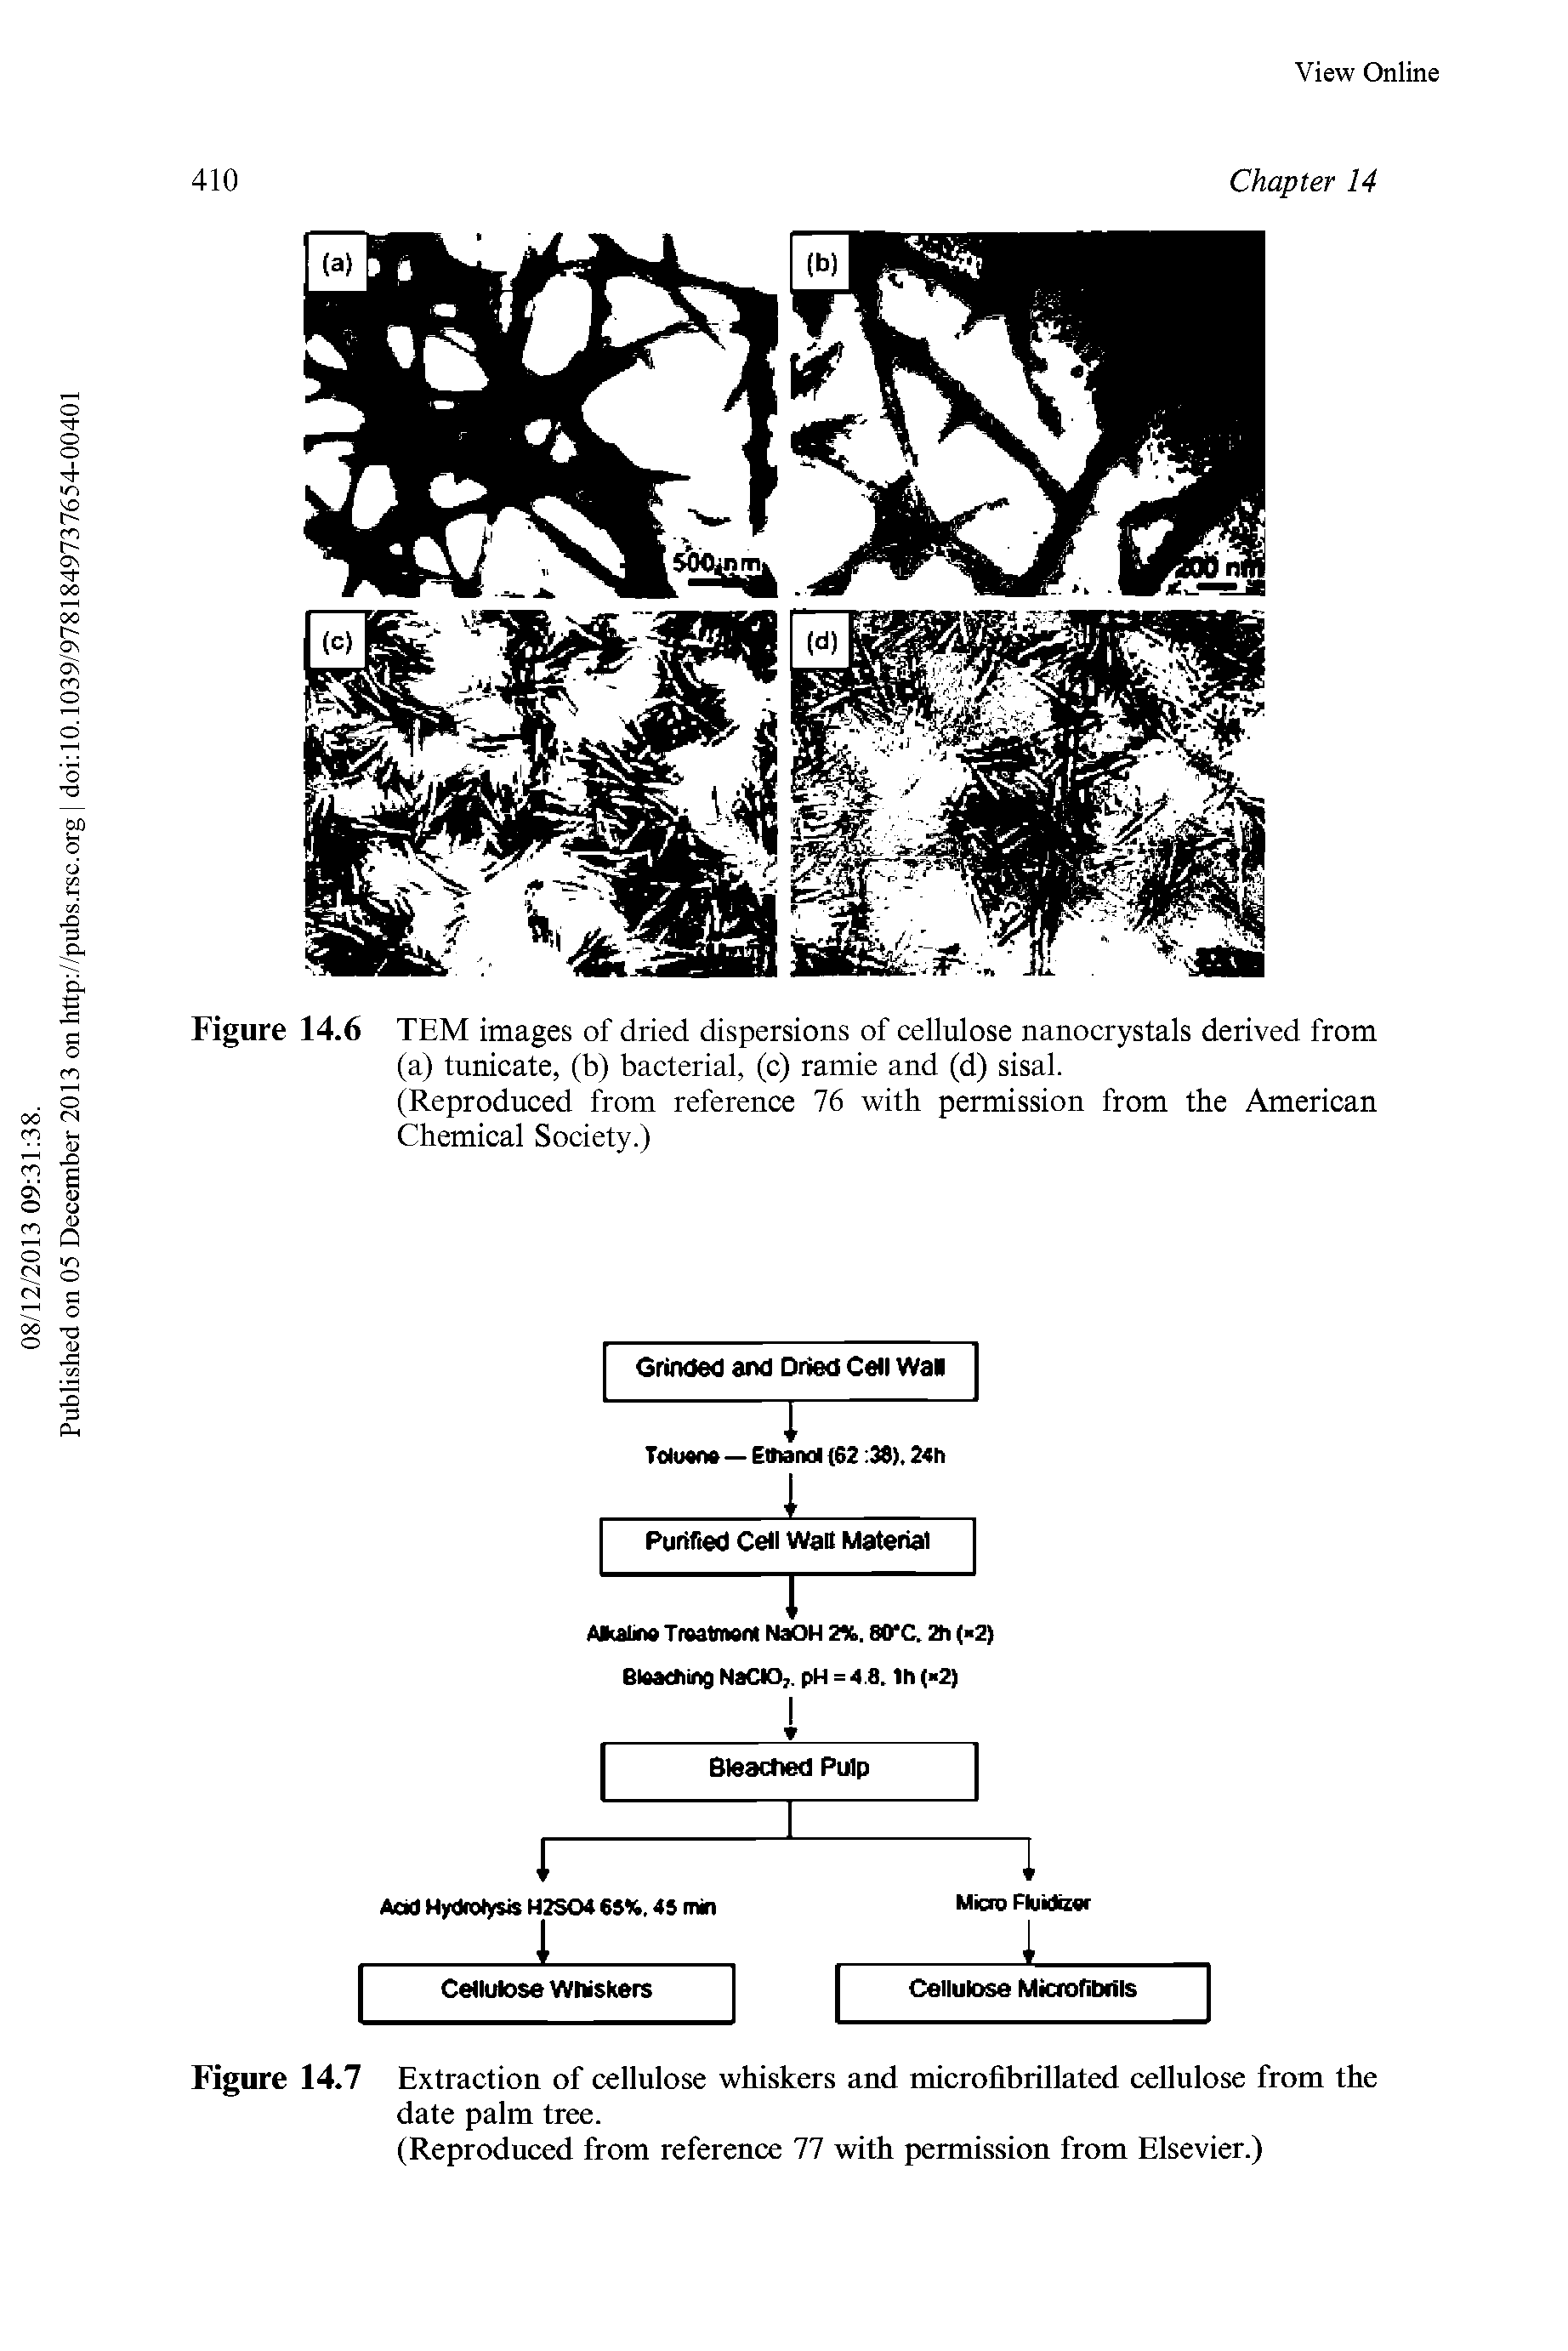 Figure 14.7 Extraction of cellulose whiskers and microfibrillated cellulose from the date palm tree.